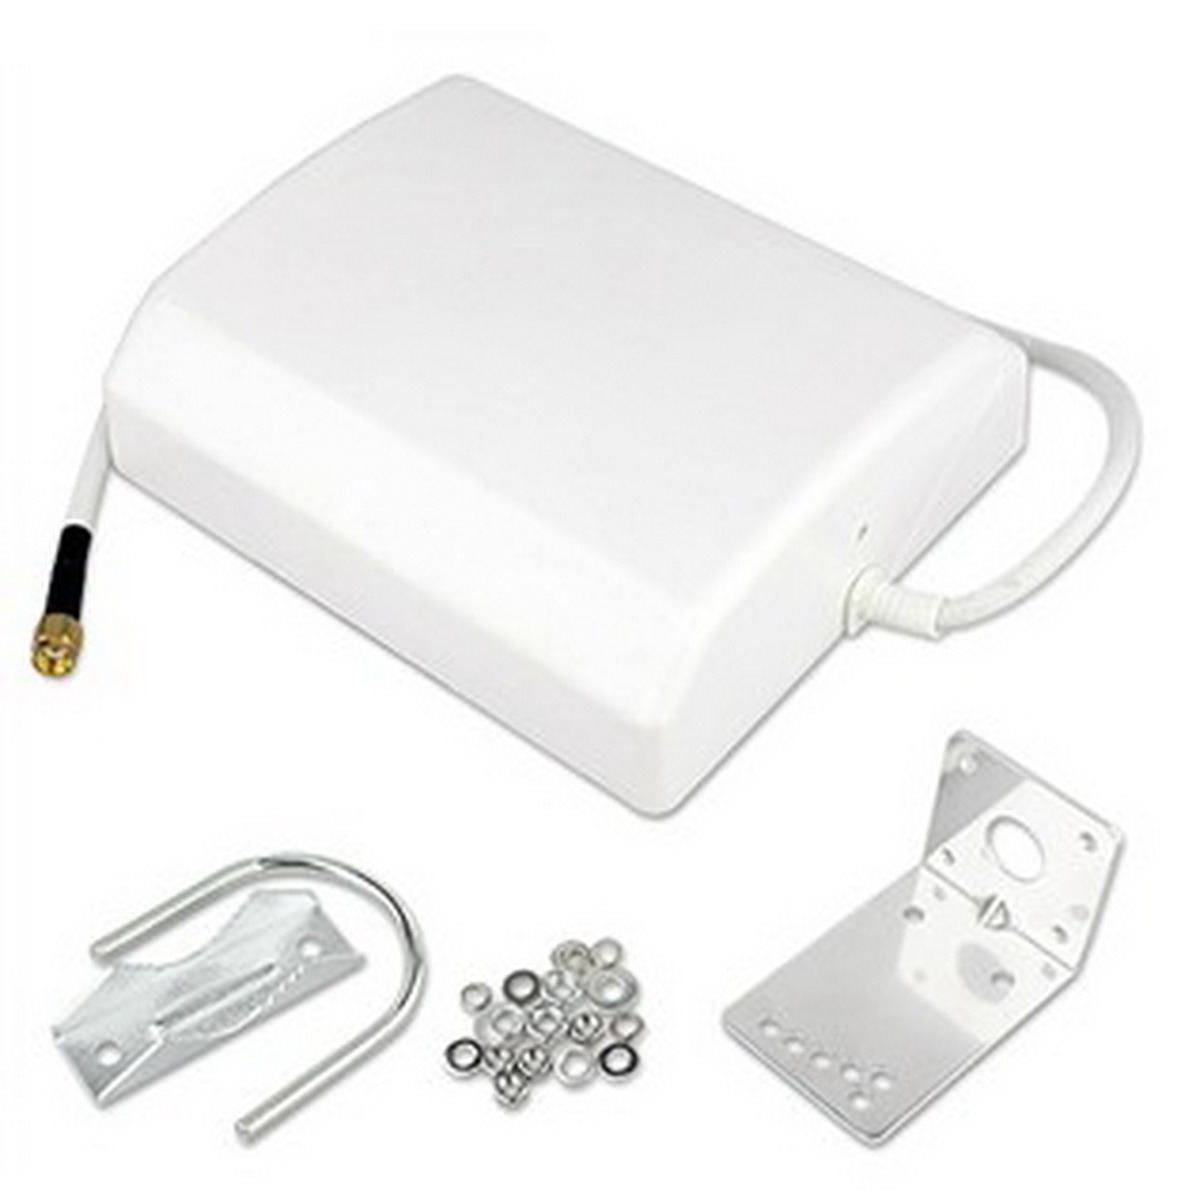 2400-2700MHz WiFi / Wimax Panel Antenna